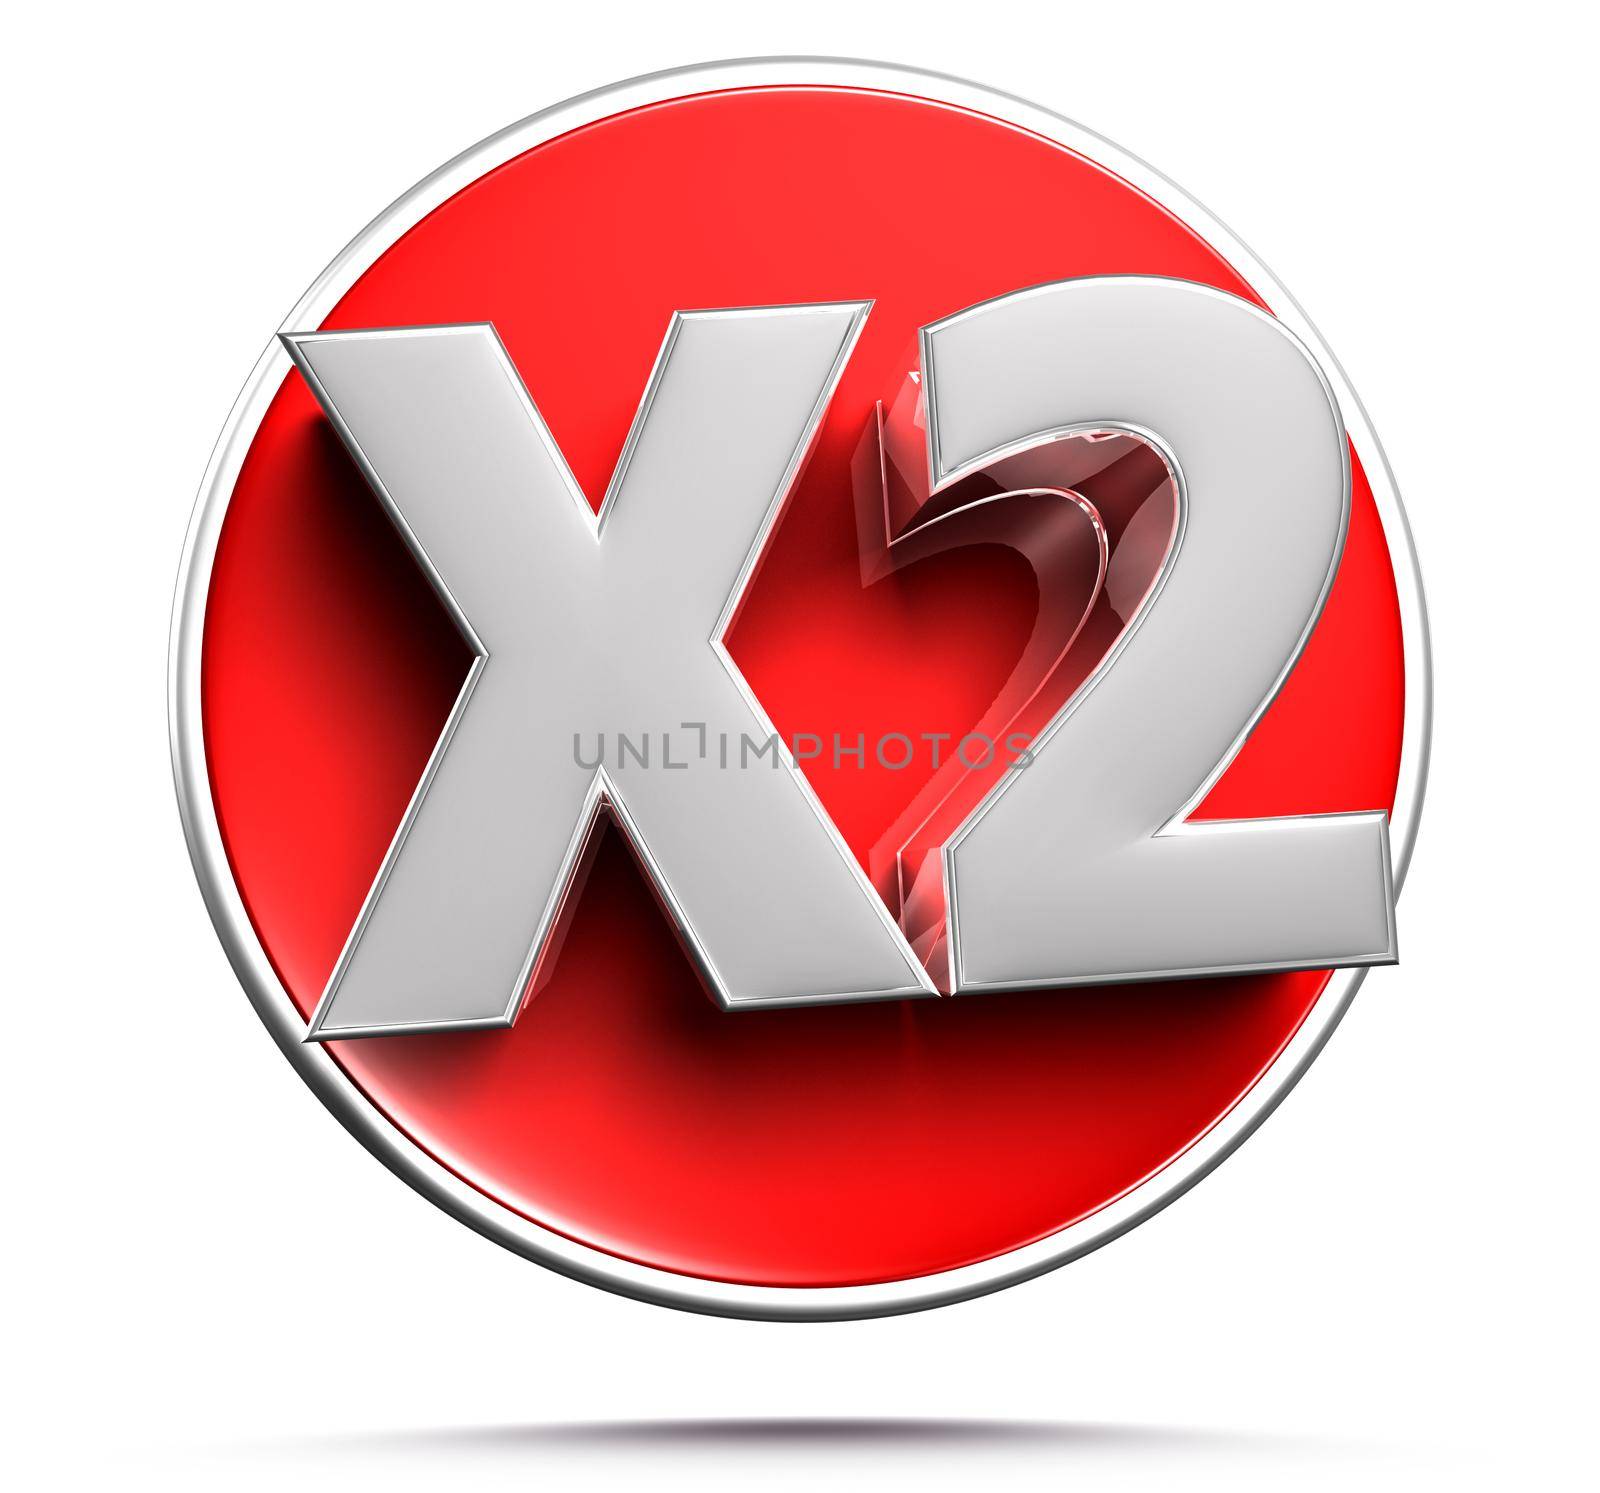 x2 red circle 3D illustration on white background with clipping path. by thitimontoyai